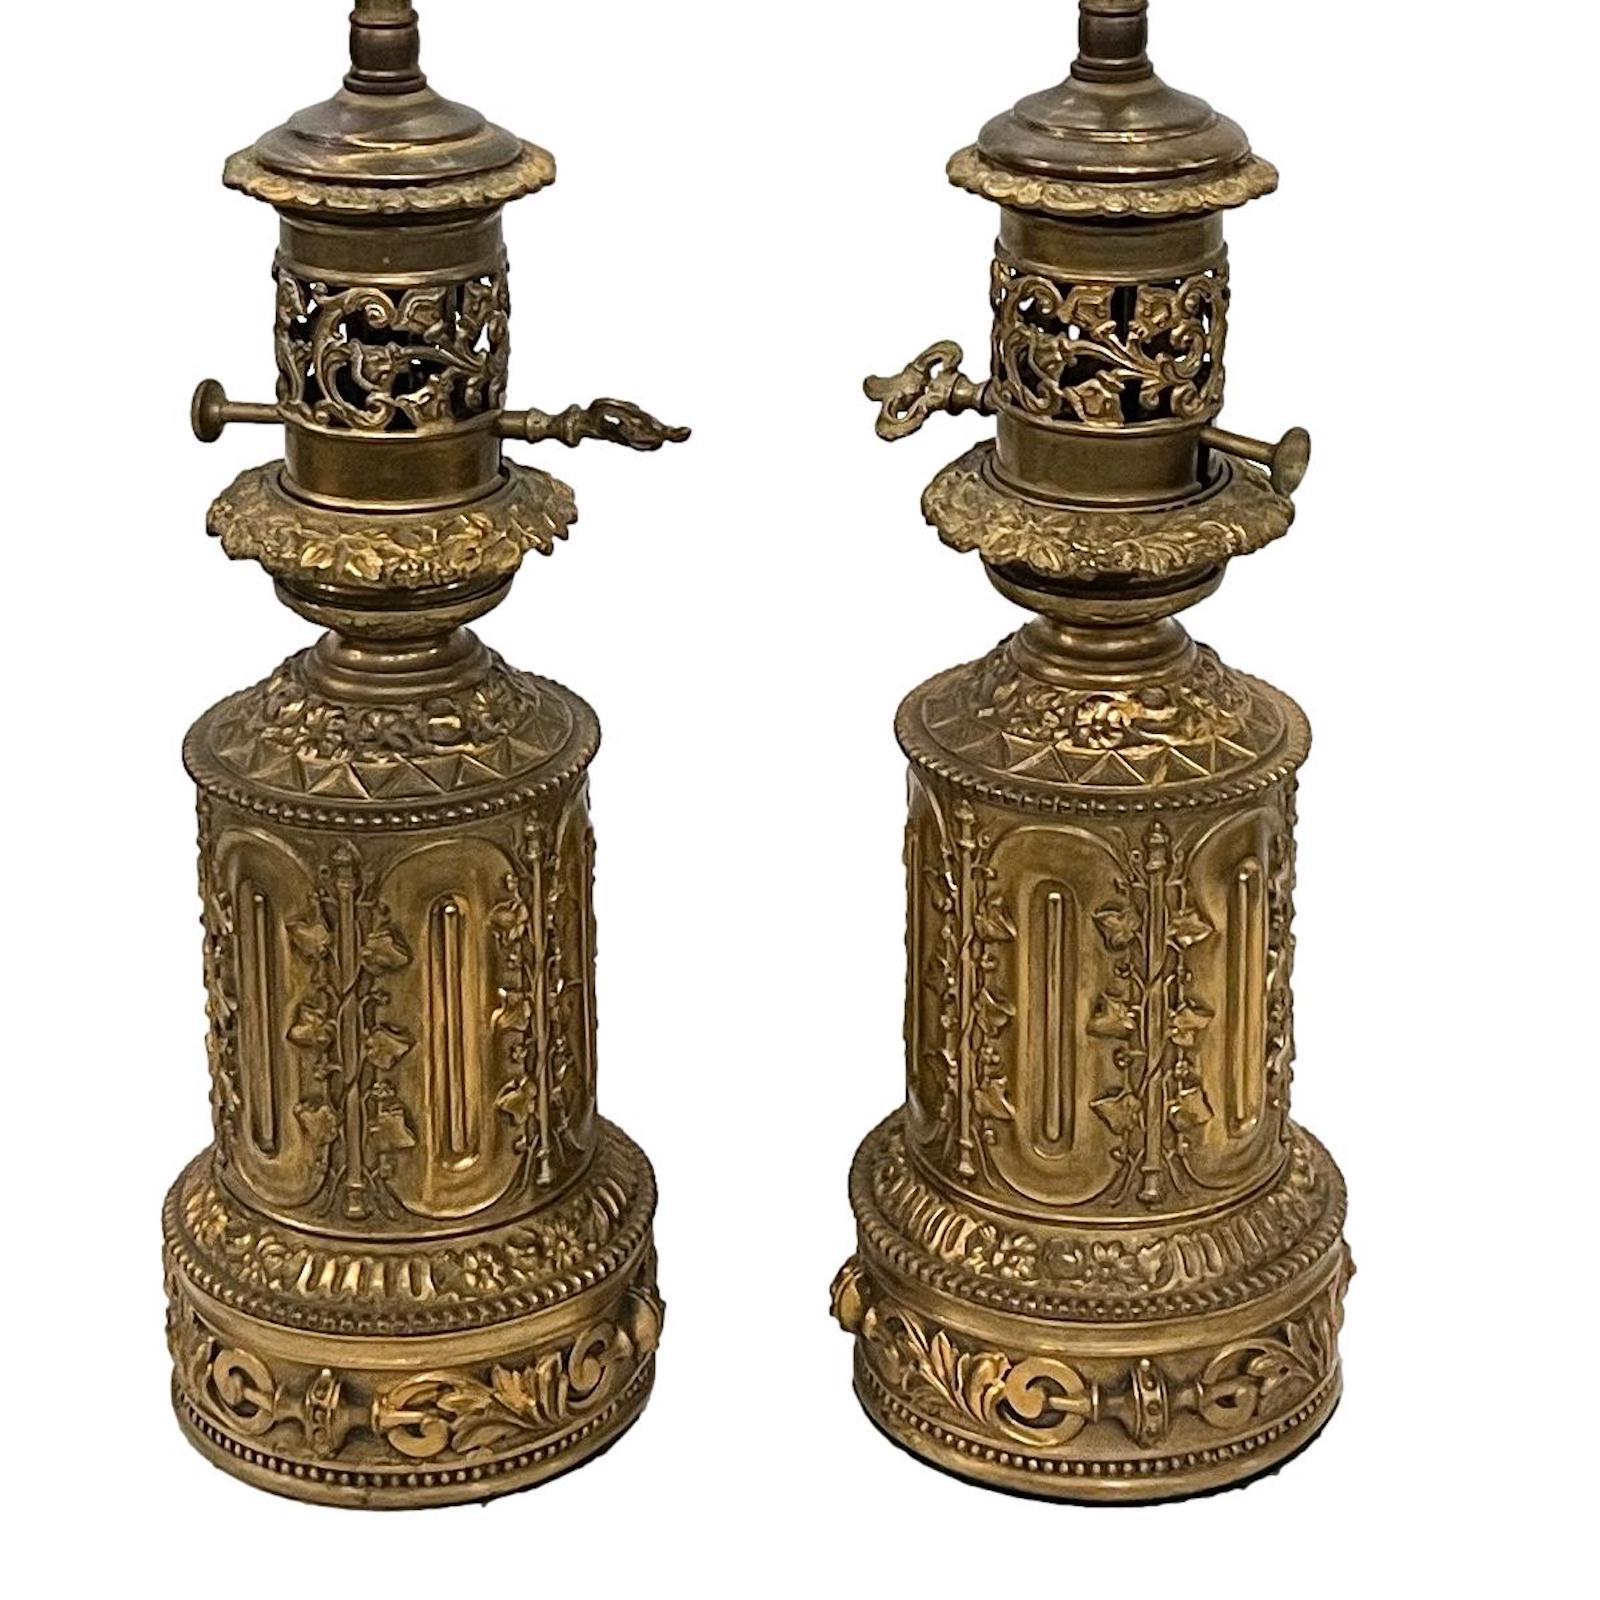 Pair of circa 1910 French oil lamps with ivy on columns details on base, electrified.

Measurements:
Height of body: 13